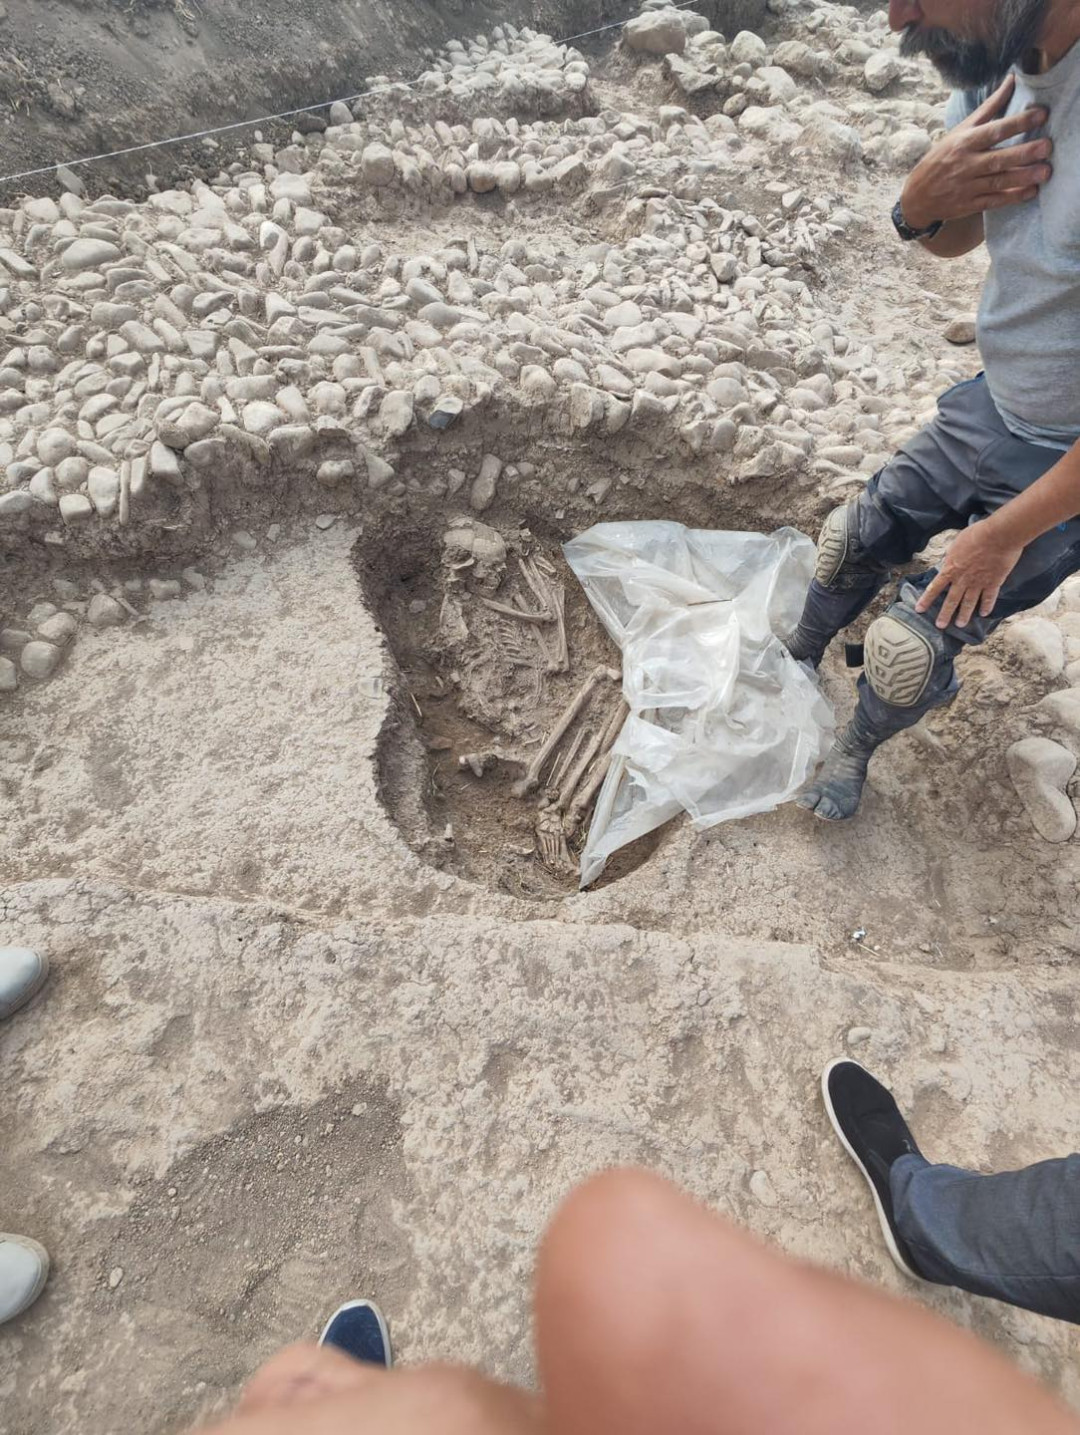 Archaeological site dating back over 2500 Years unearthed in al-Sulaymaniyah